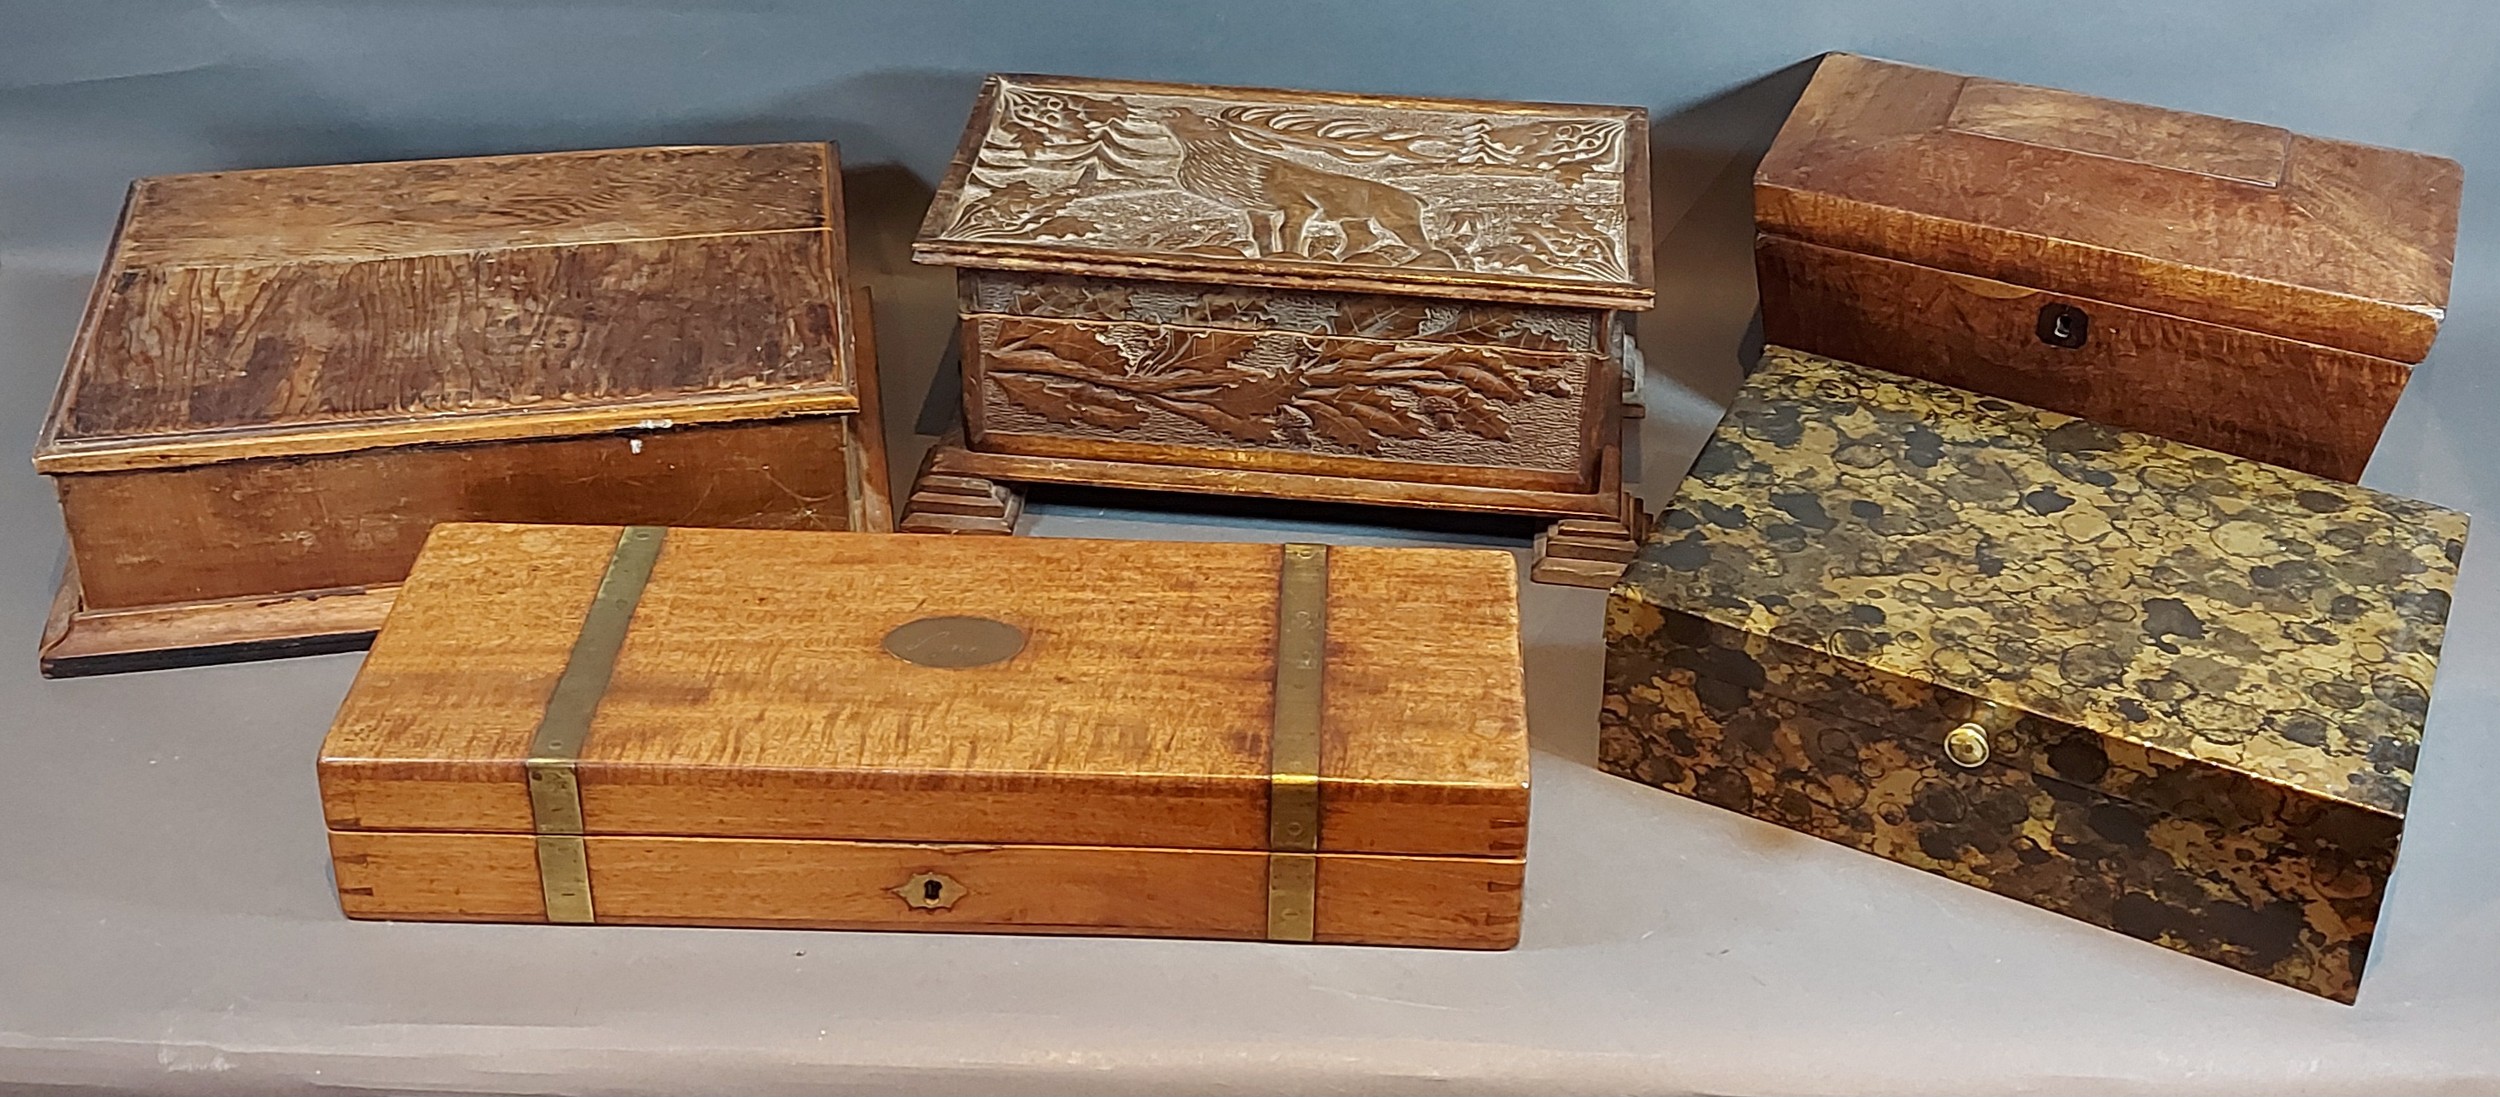 A 19th Century mahogany and brass bound box, (possibly a gun case) together with four other boxes